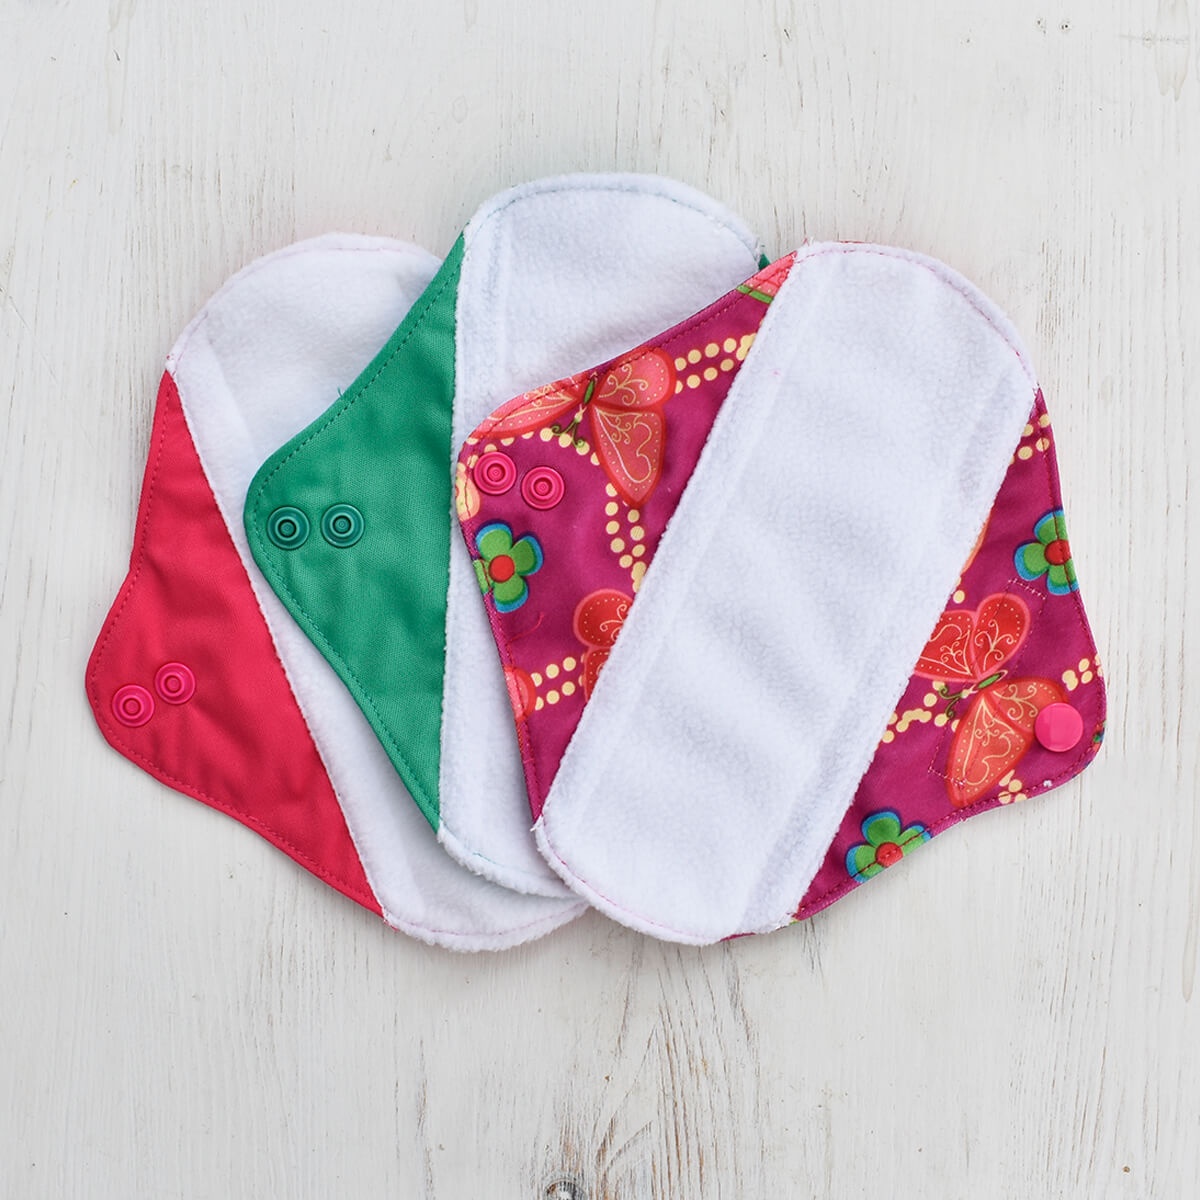 https://www.peacewiththewild.co.uk/wp-content/uploads/2019/08/small-reusable-sanitary-pads-3-pack-butterfly.jpg